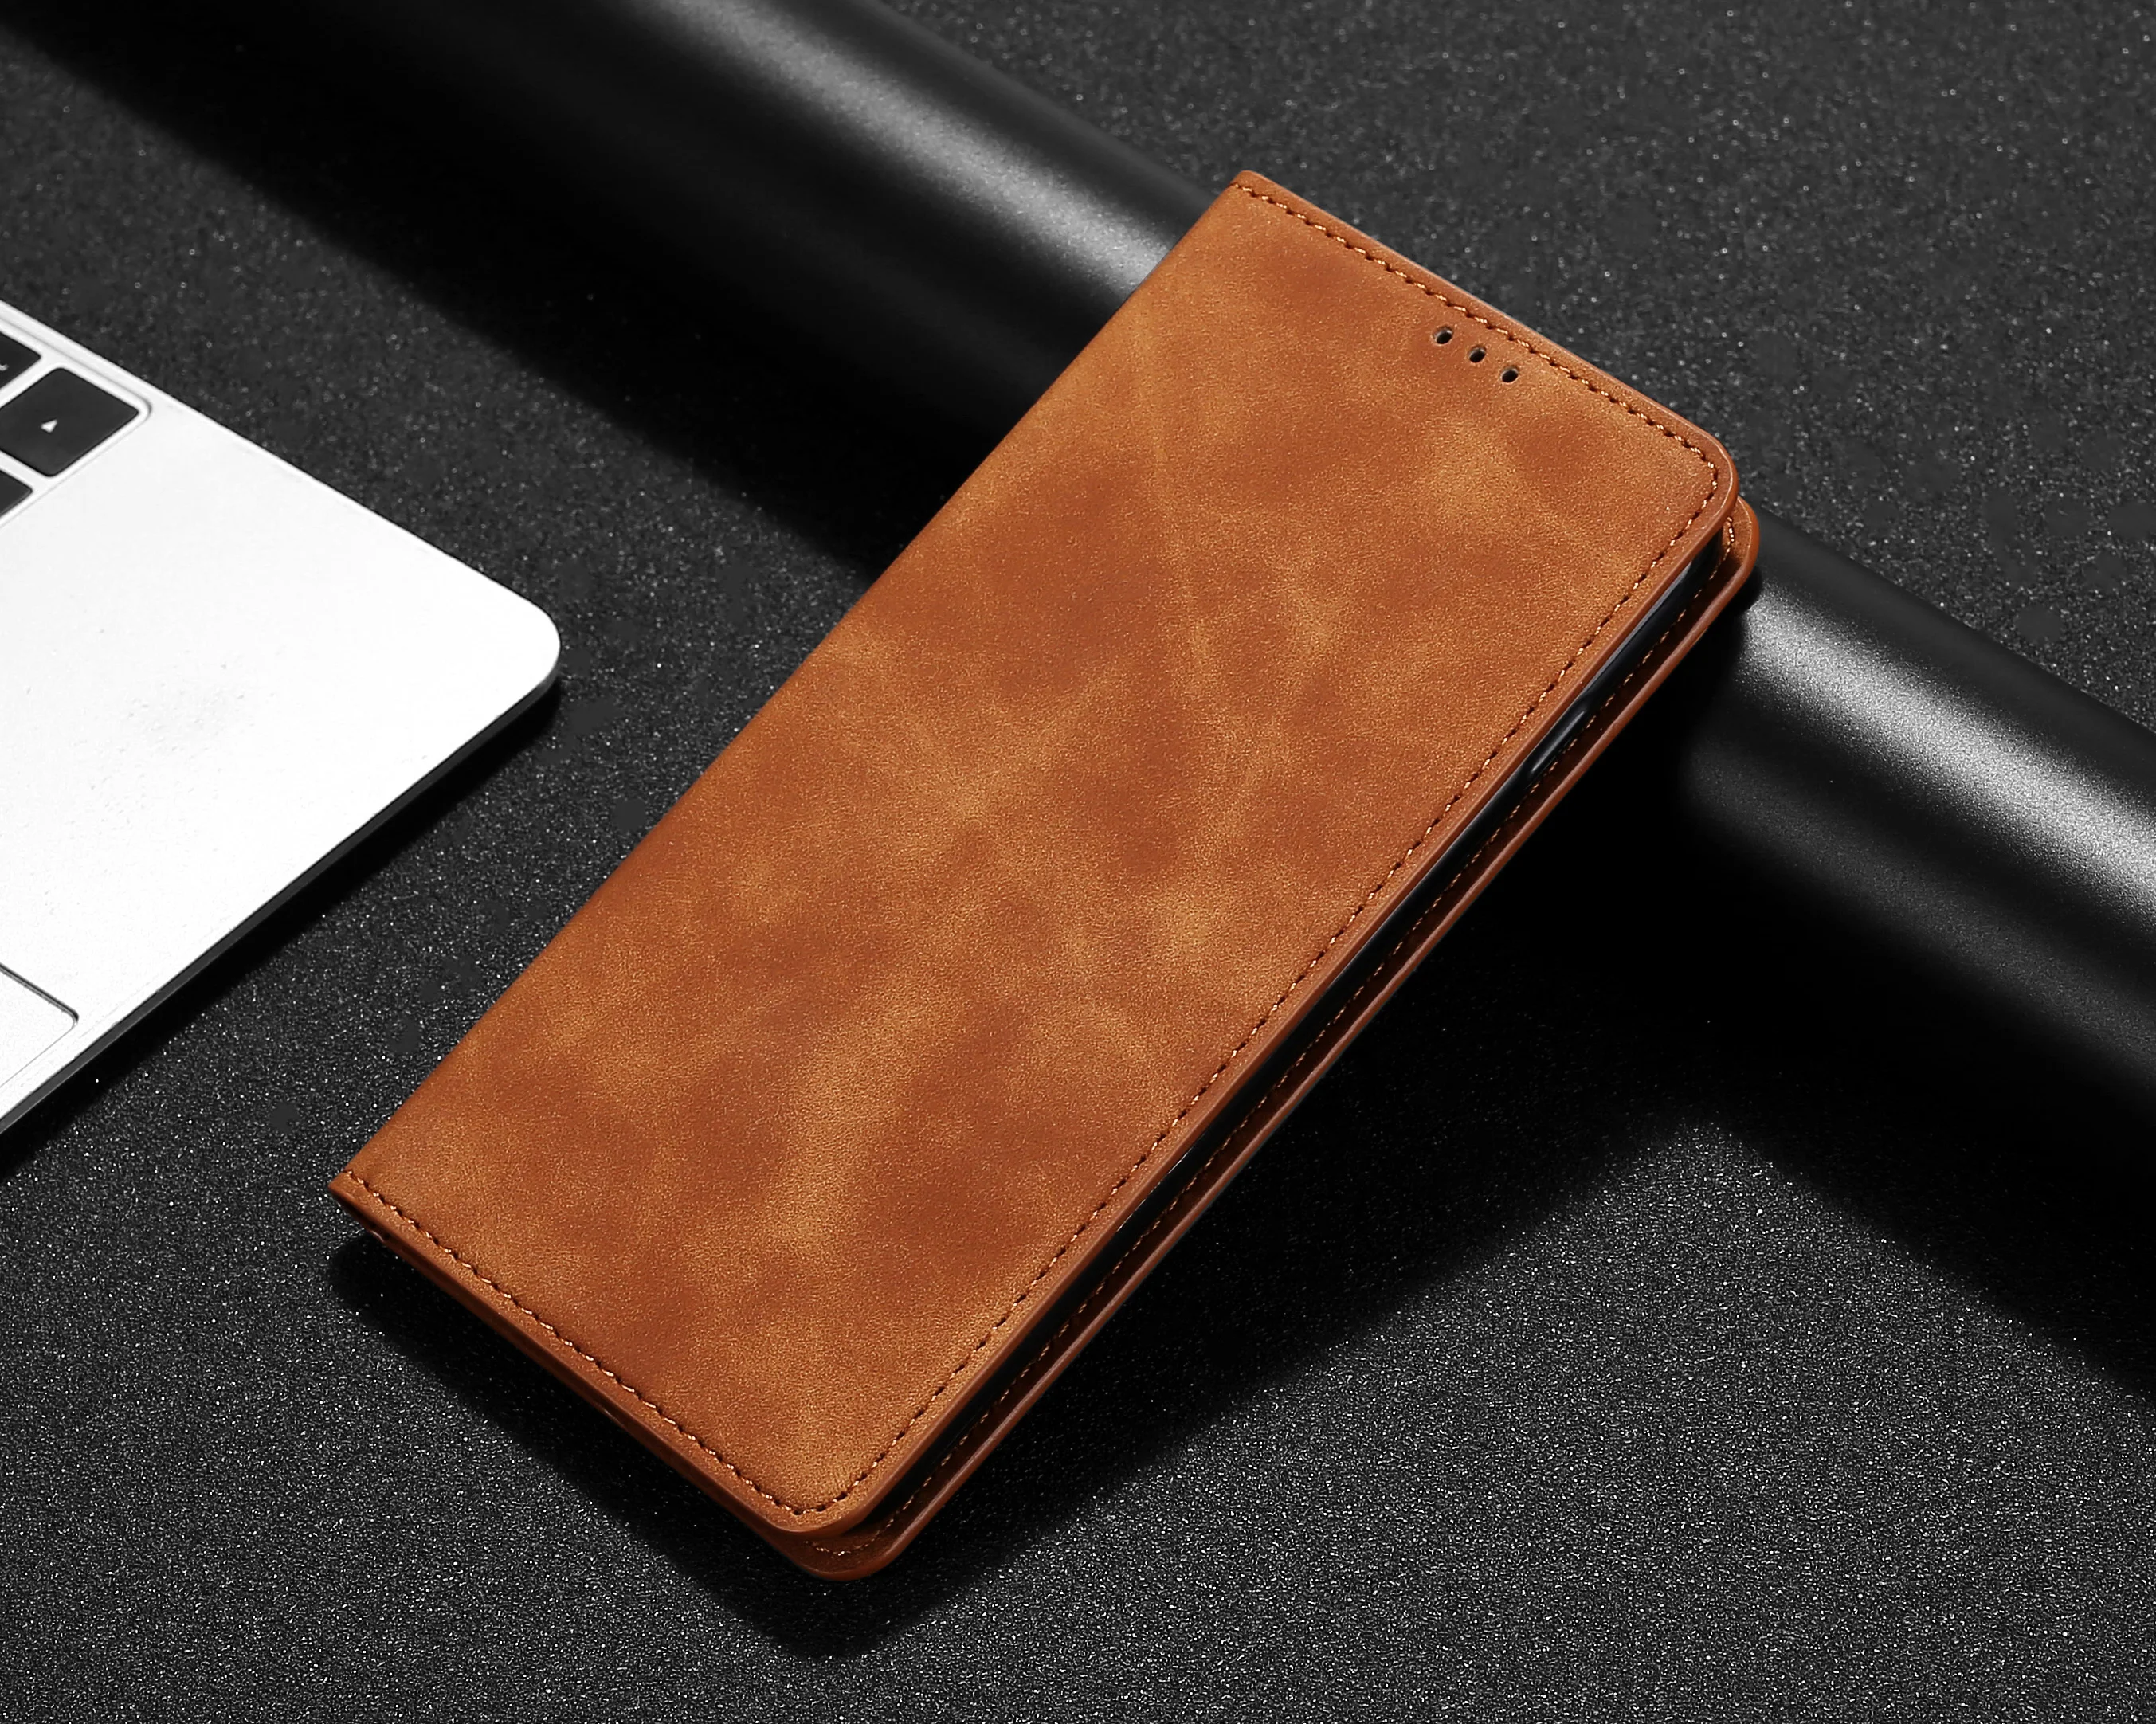 Phone Case For Xiaomi Redmi Note 9S 9A 9C 9 8 8T 8A 7 7A 6 6A 5 5A 4A 4X Case Flip Wallet Cover Magnetic Leather Fundas Redmi 9A xiaomi leather case case